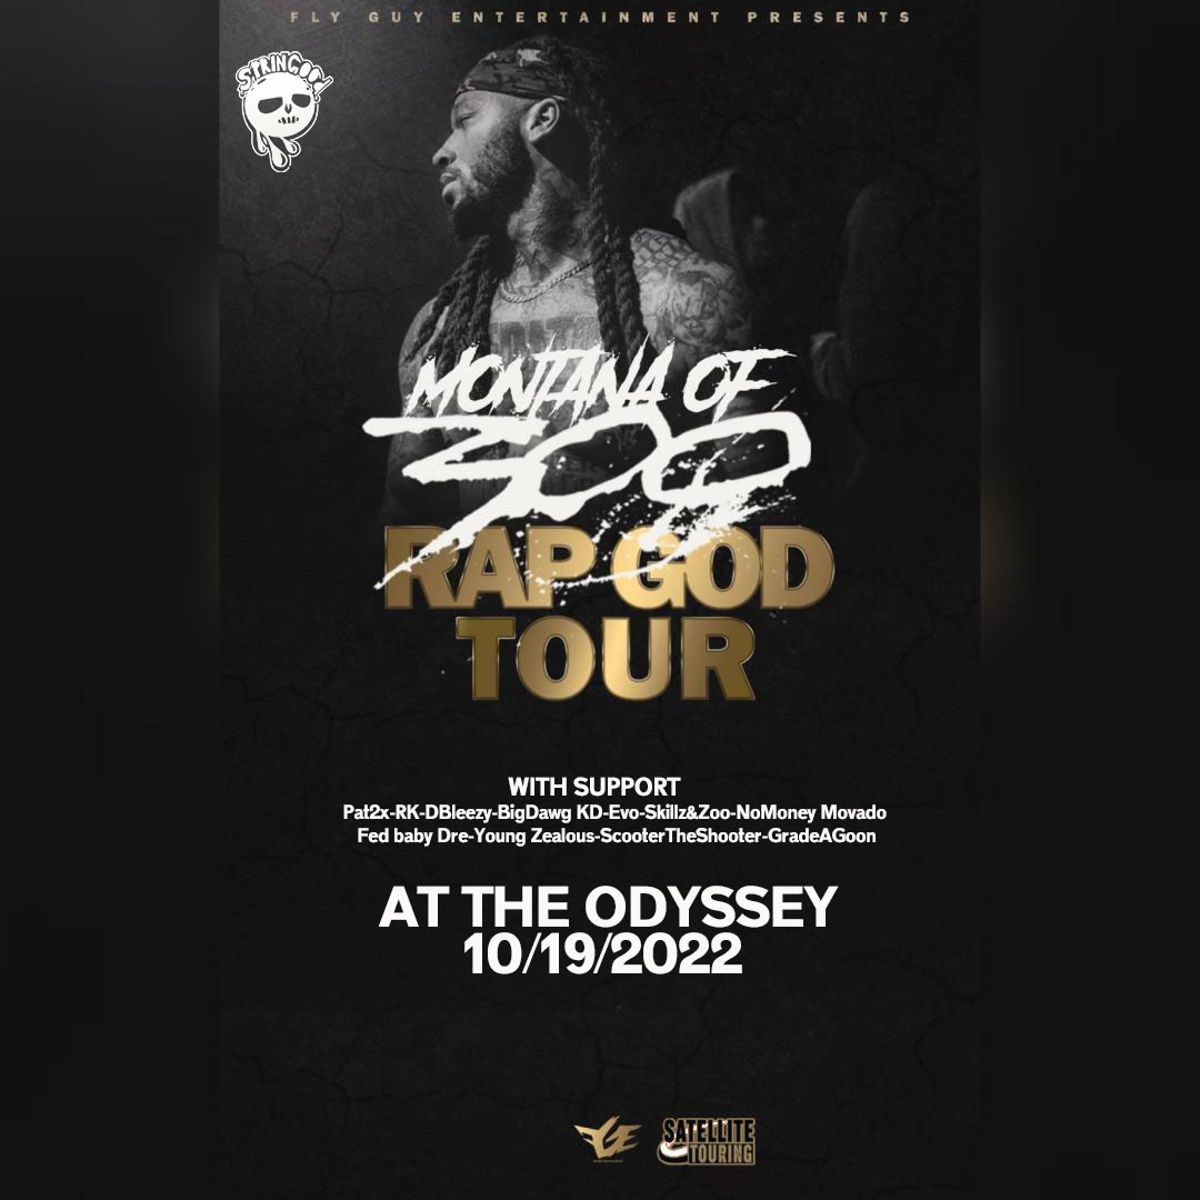 Montana Of 300 Live at the Odyssey